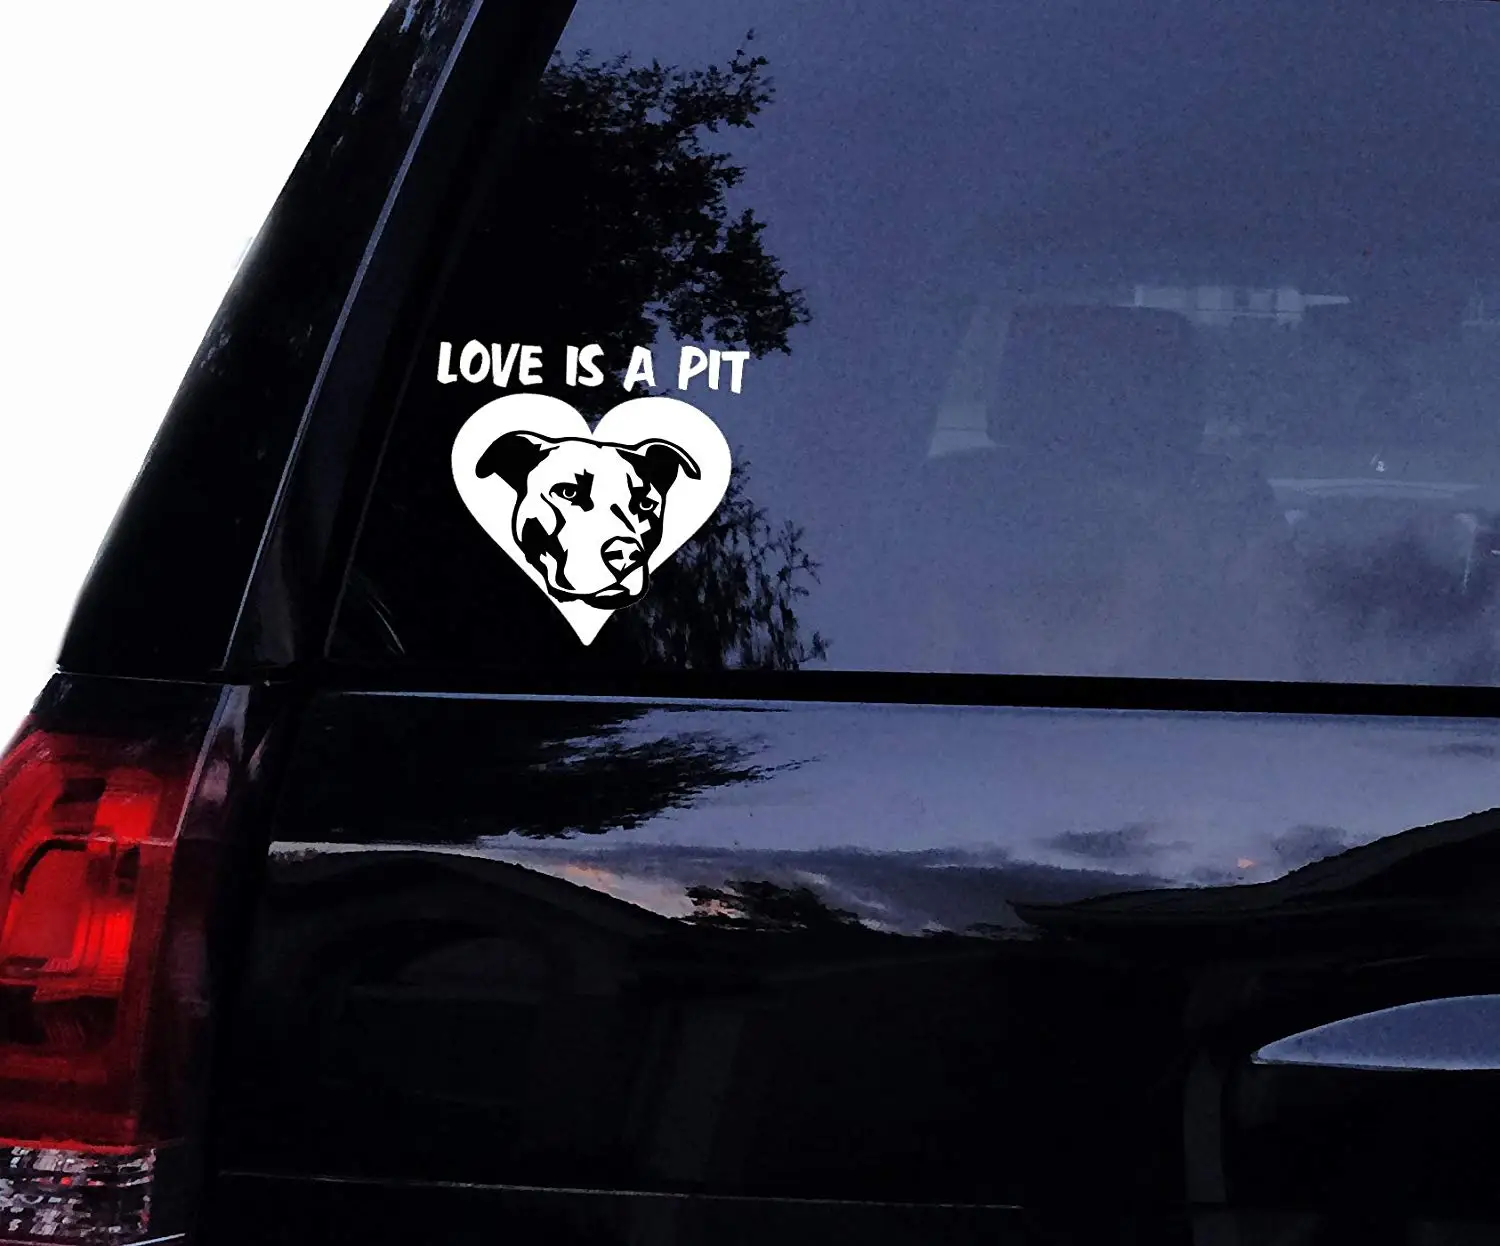 

Love Is A PIT - Pitbull Dog Vinyl Car Decal, Laptop Decal, Car Sticker, Boat (6in, White)